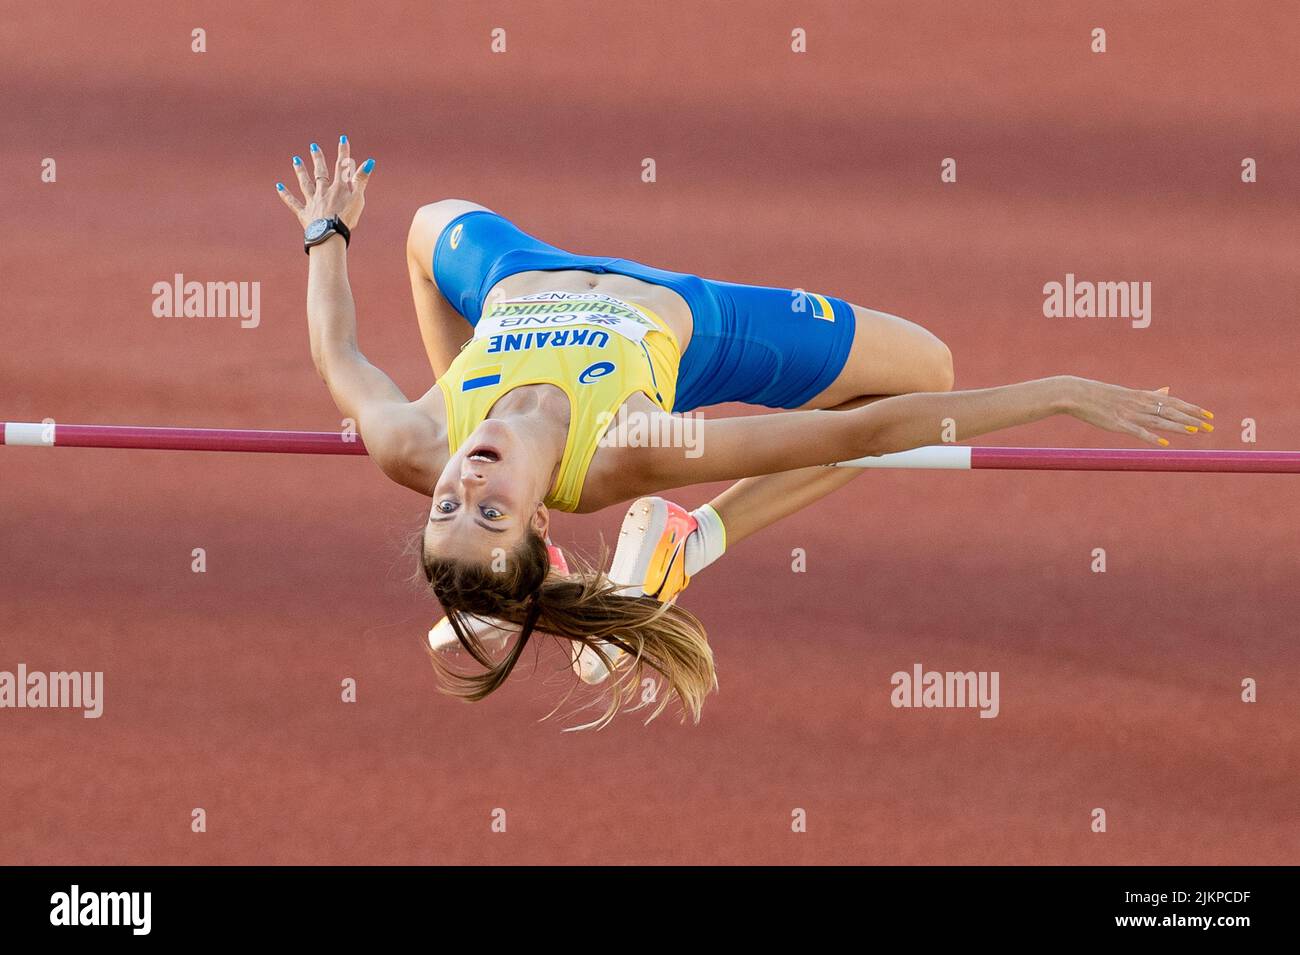 Yaroslava Mahuchikh (UKR) jumps 6-7 1/2 (2.02) to claim the silver medal in the high jump during the afternoon session on day 5 of the World Athletics Stock Photo